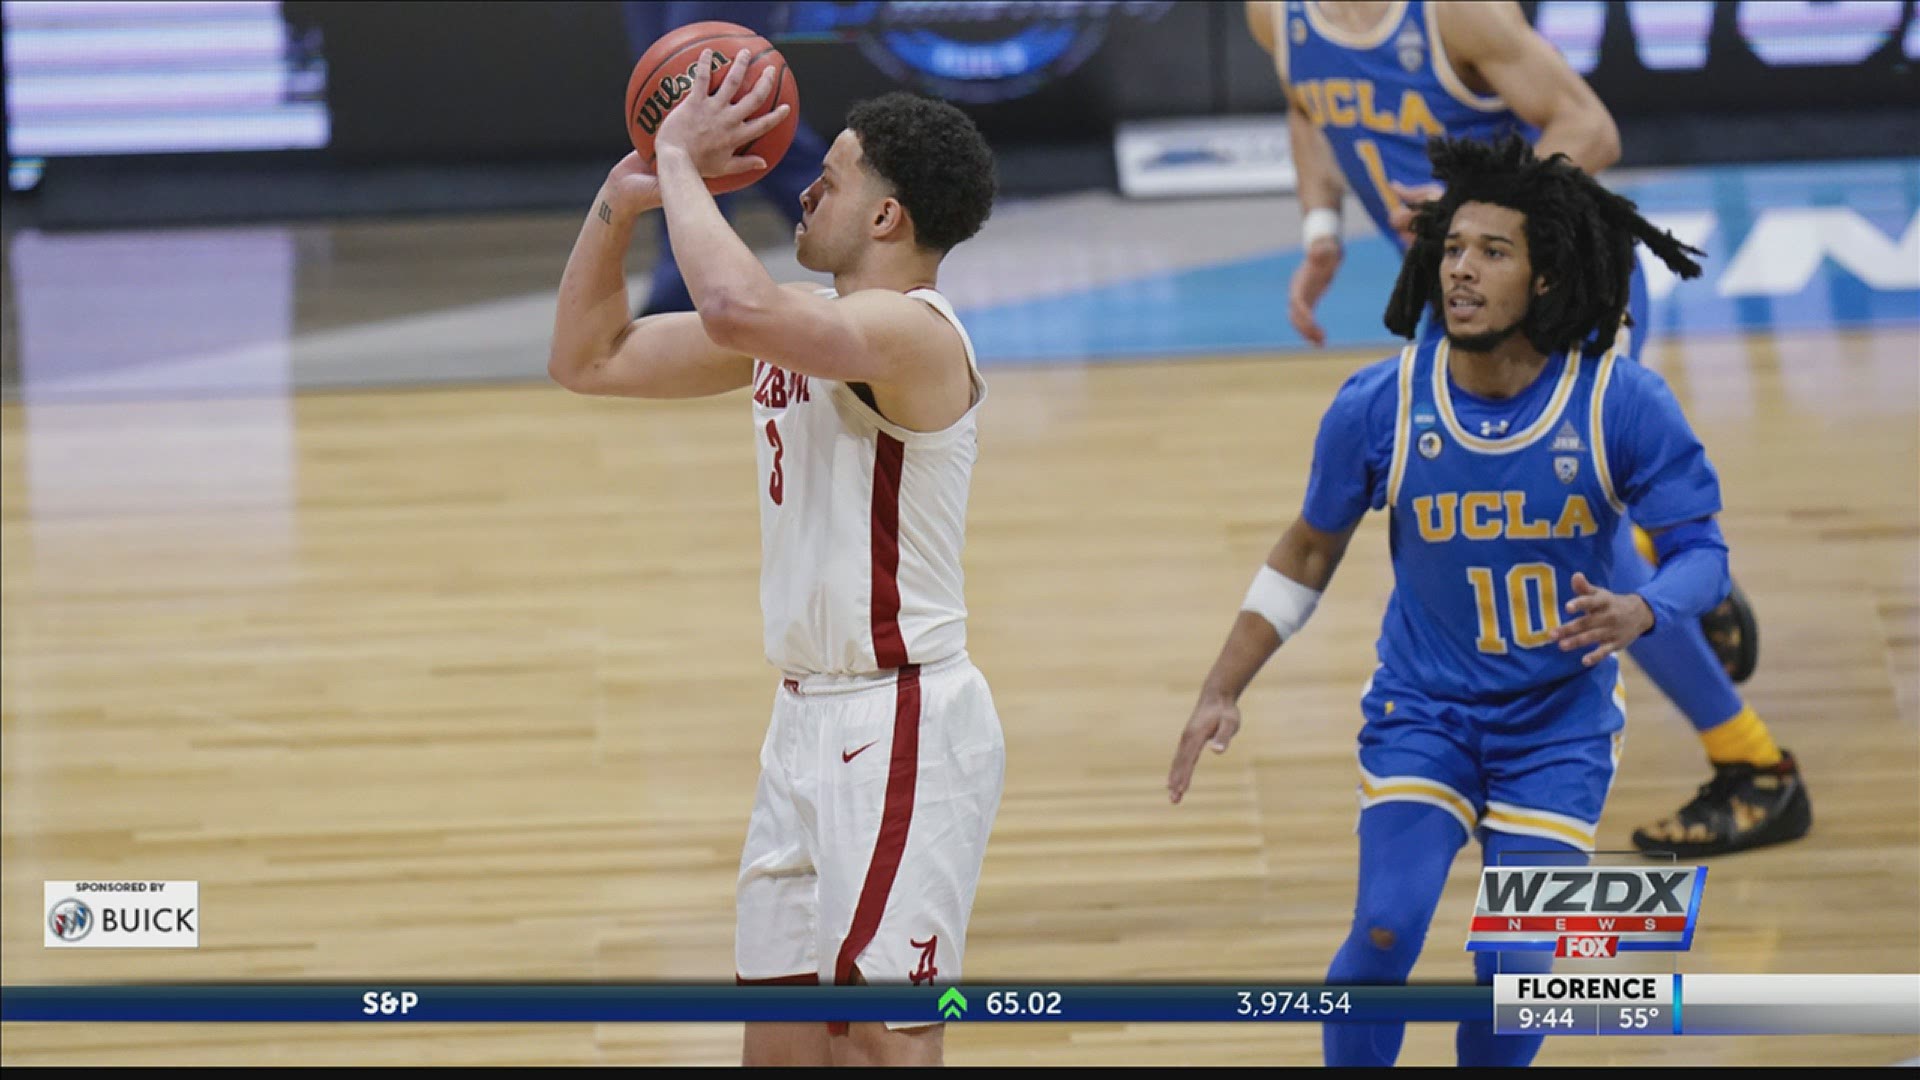 Jaime Jaquez Jr. scored 17 points, hitting two big jumpers early in overtime, and No. 11 seed UCLA held to beat No. 2 seed Alabama 88-78 in overtime in the Sweet 16